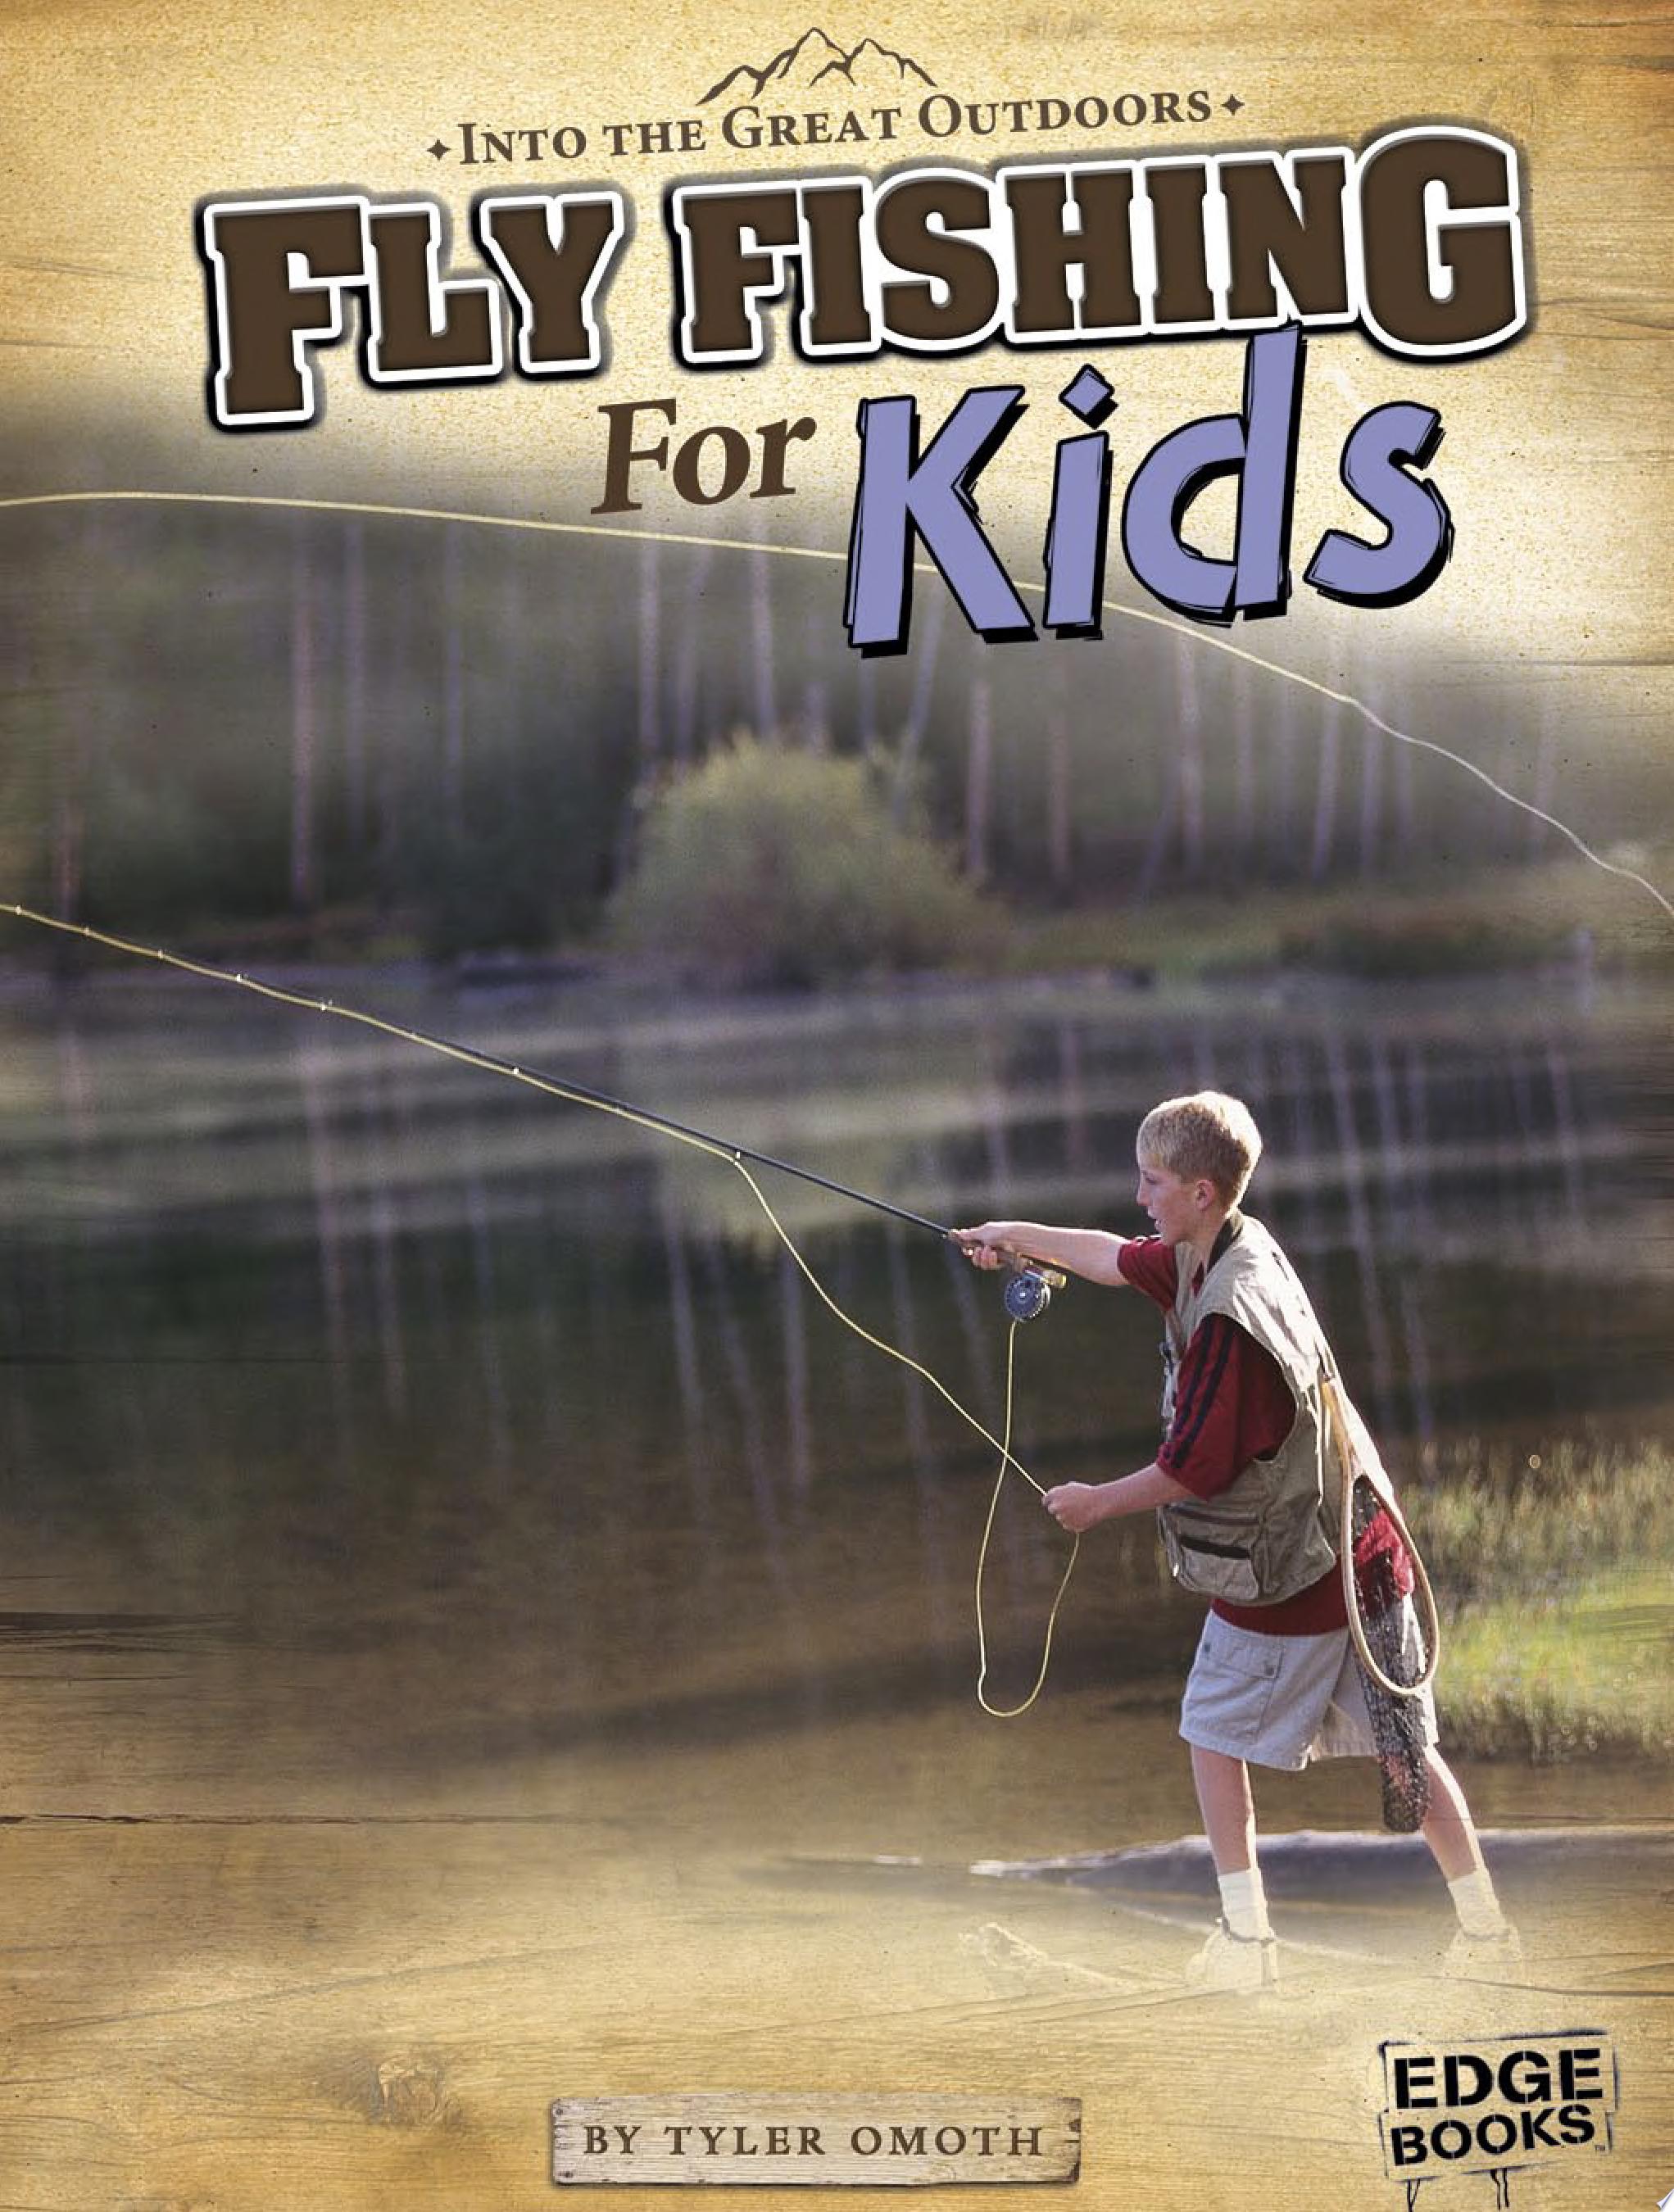 Image for "Fly Fishing for Kids"